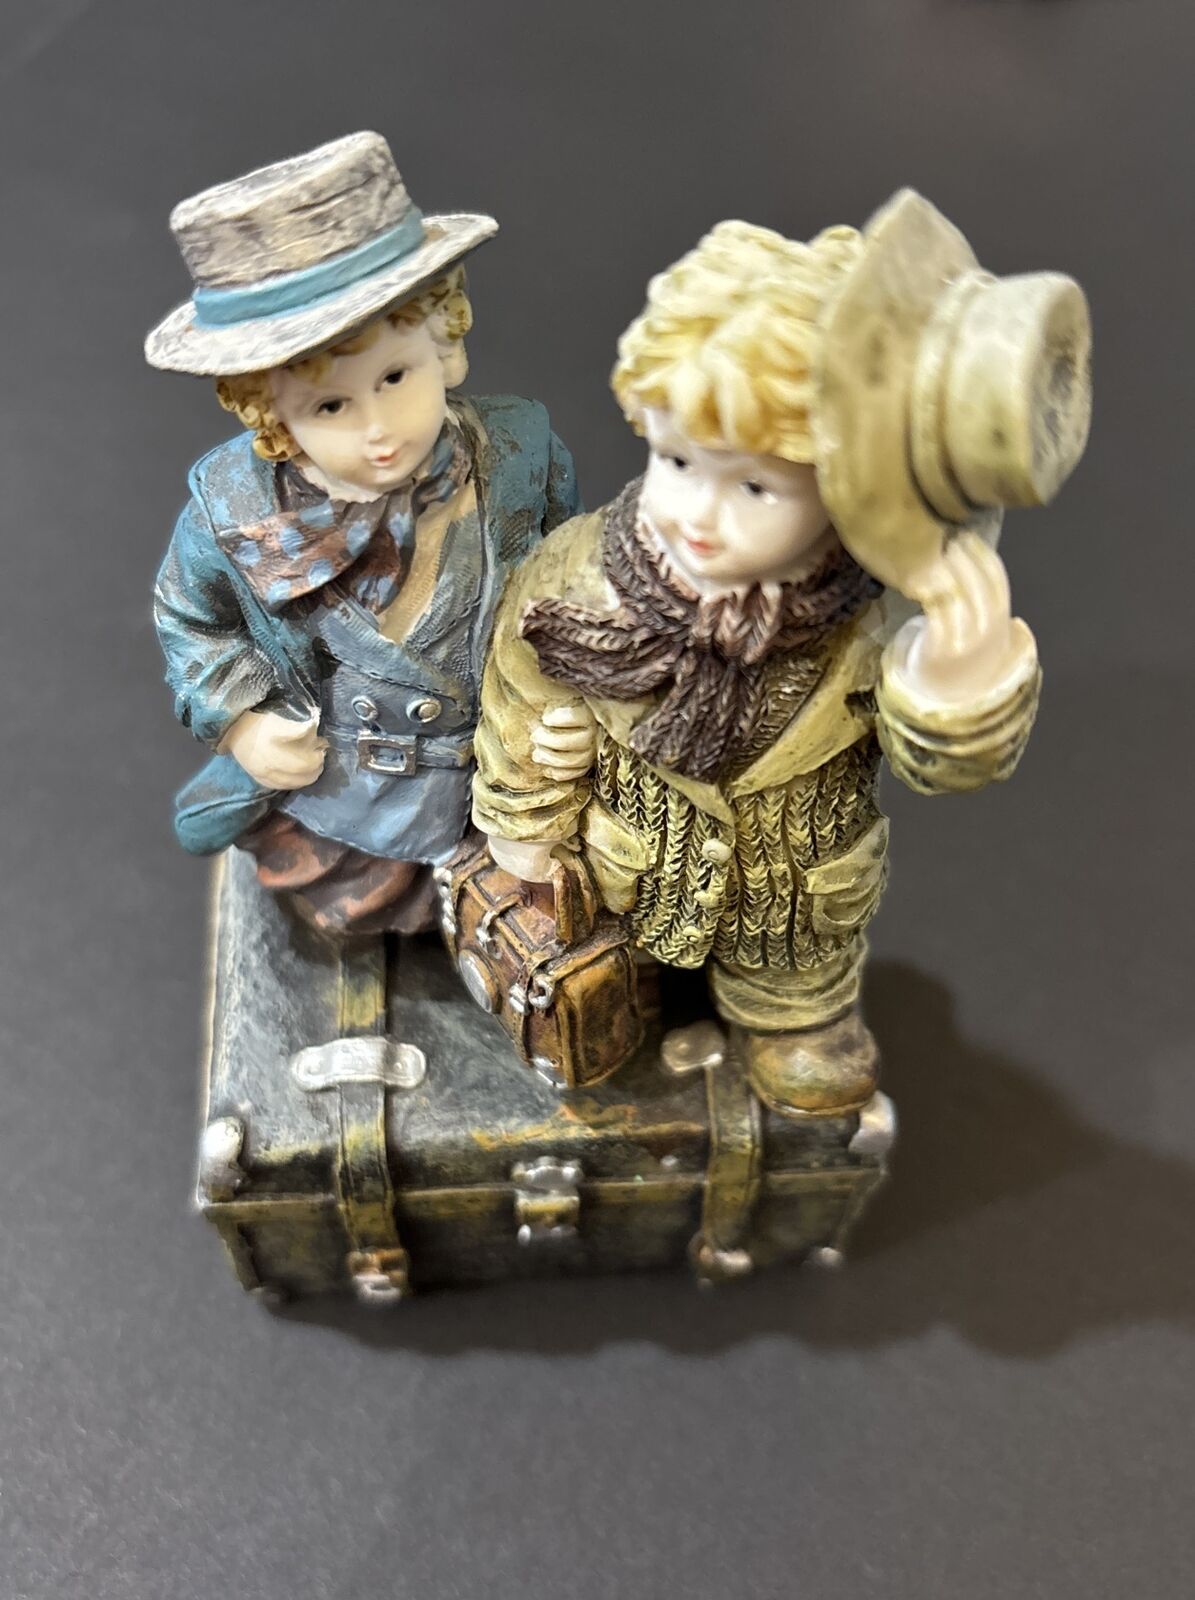 Traveling Children Figurine - 4” Tall - Suitcase Trunk Coat Wearing Hats